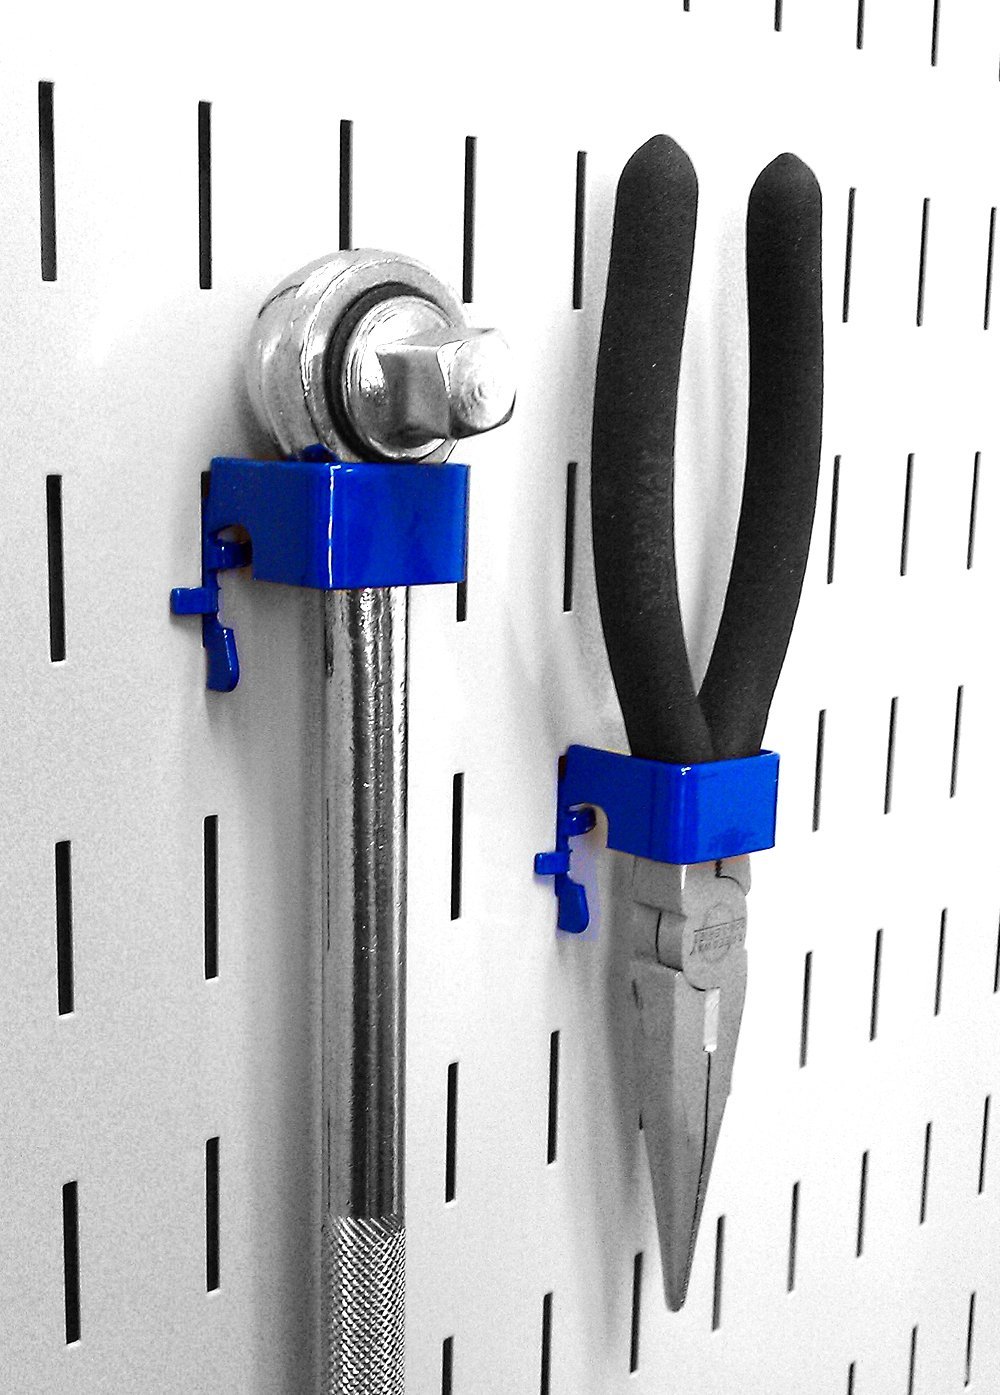 Slotted Metal Pegboard Deluxe Hook Kit for Wall Control Metal Pegboard and Slotted Tool Board Only - Blue Toolboard Hooks - image 3 of 12